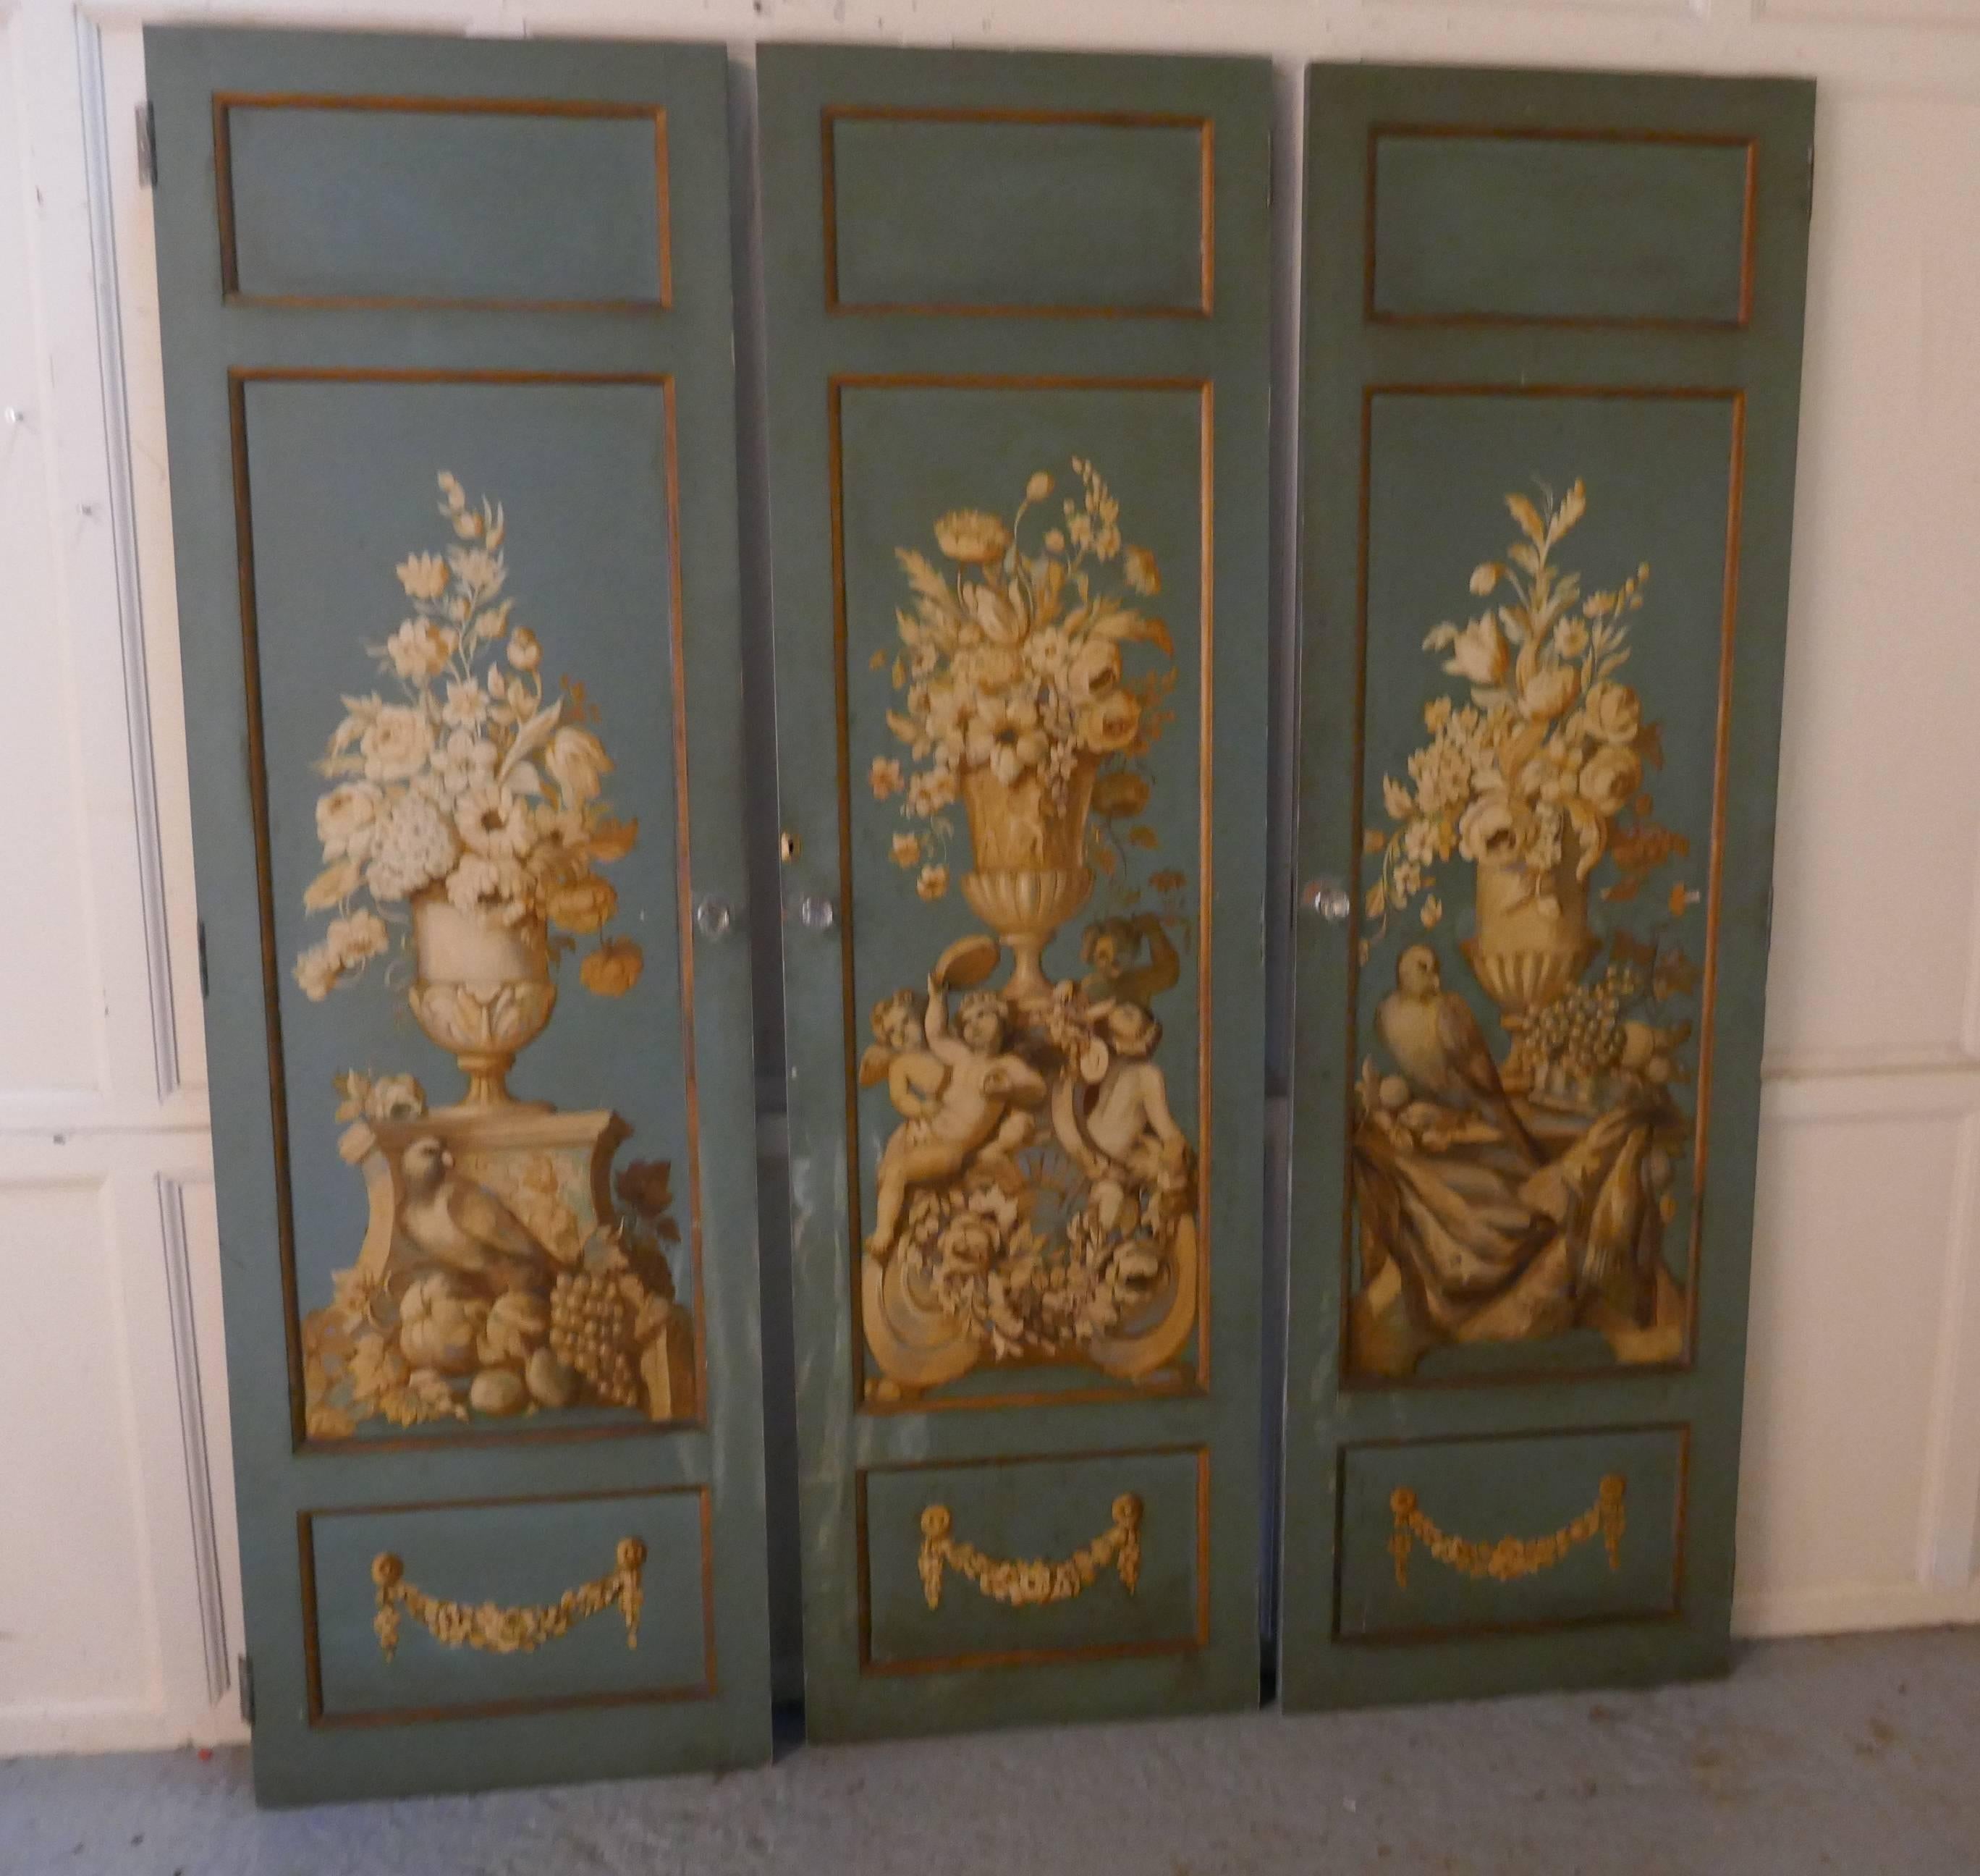 Decorative French painted doors

This is a very attractive trio of mid-19th century painted panelled doors, the have come from a piece of furniture like an armoire.
The doors have been hand painted with urns, birds and cherubs with plentiful